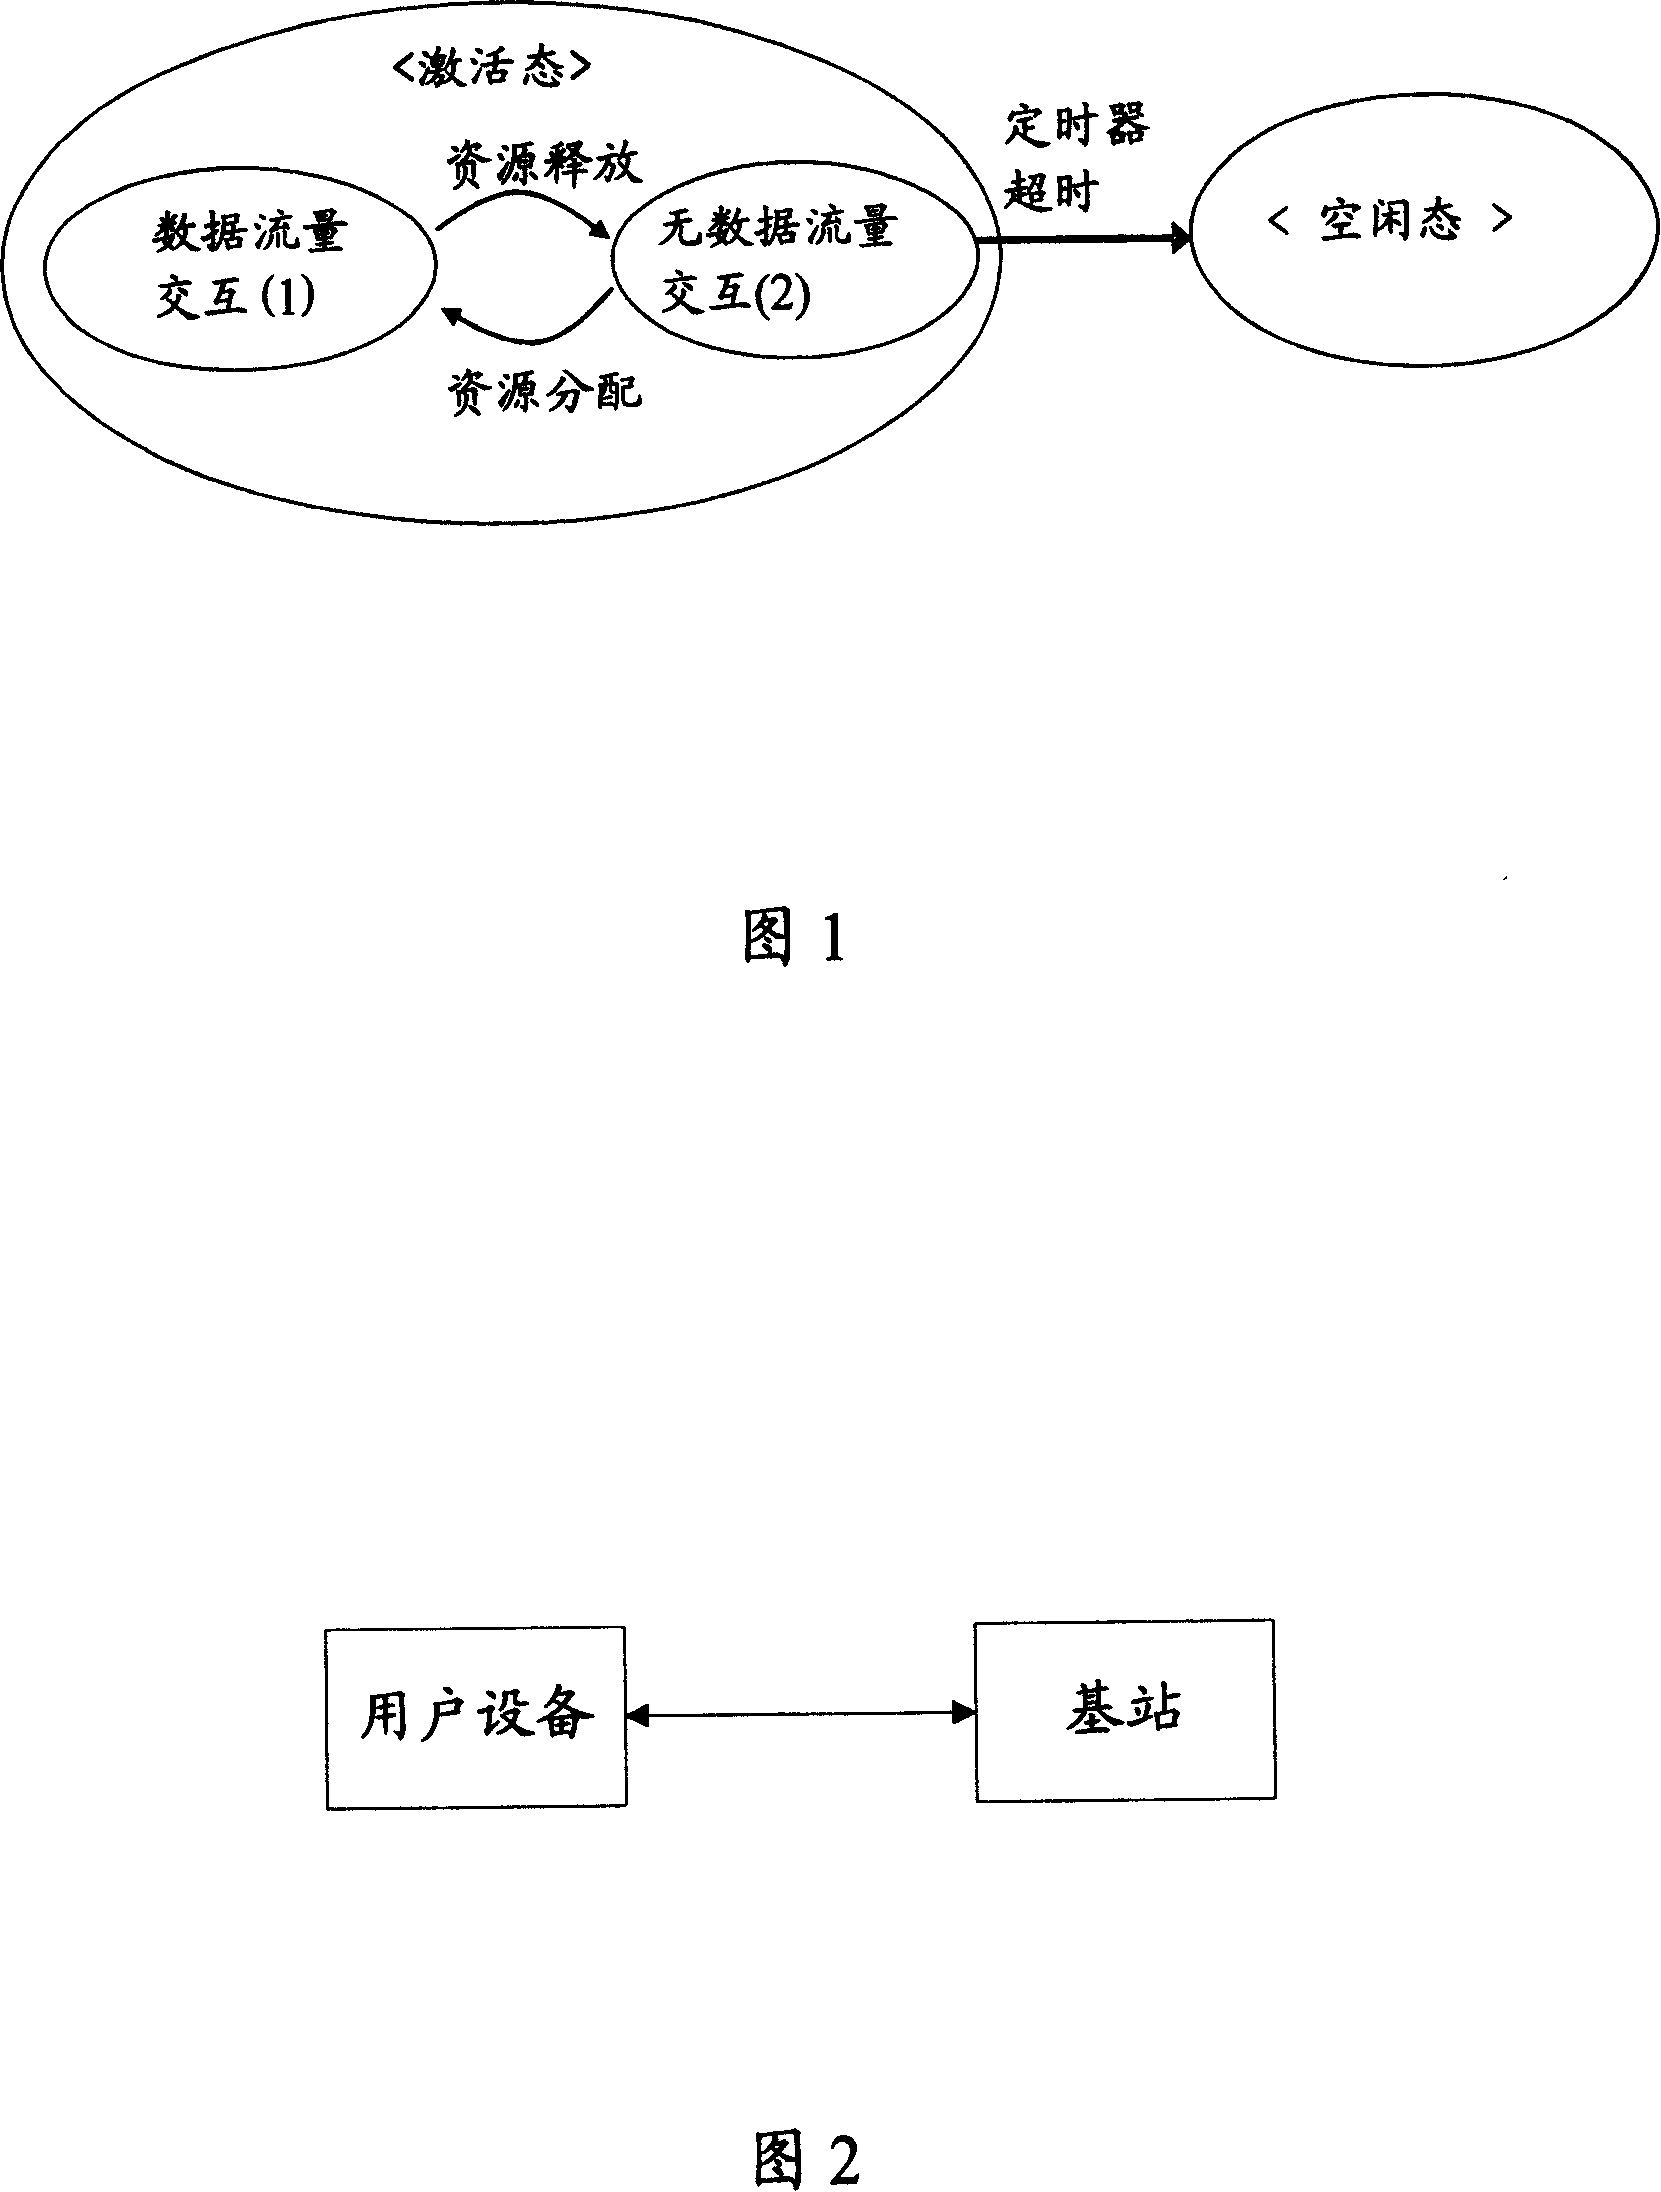 Method and system for remaining ascending synchronization